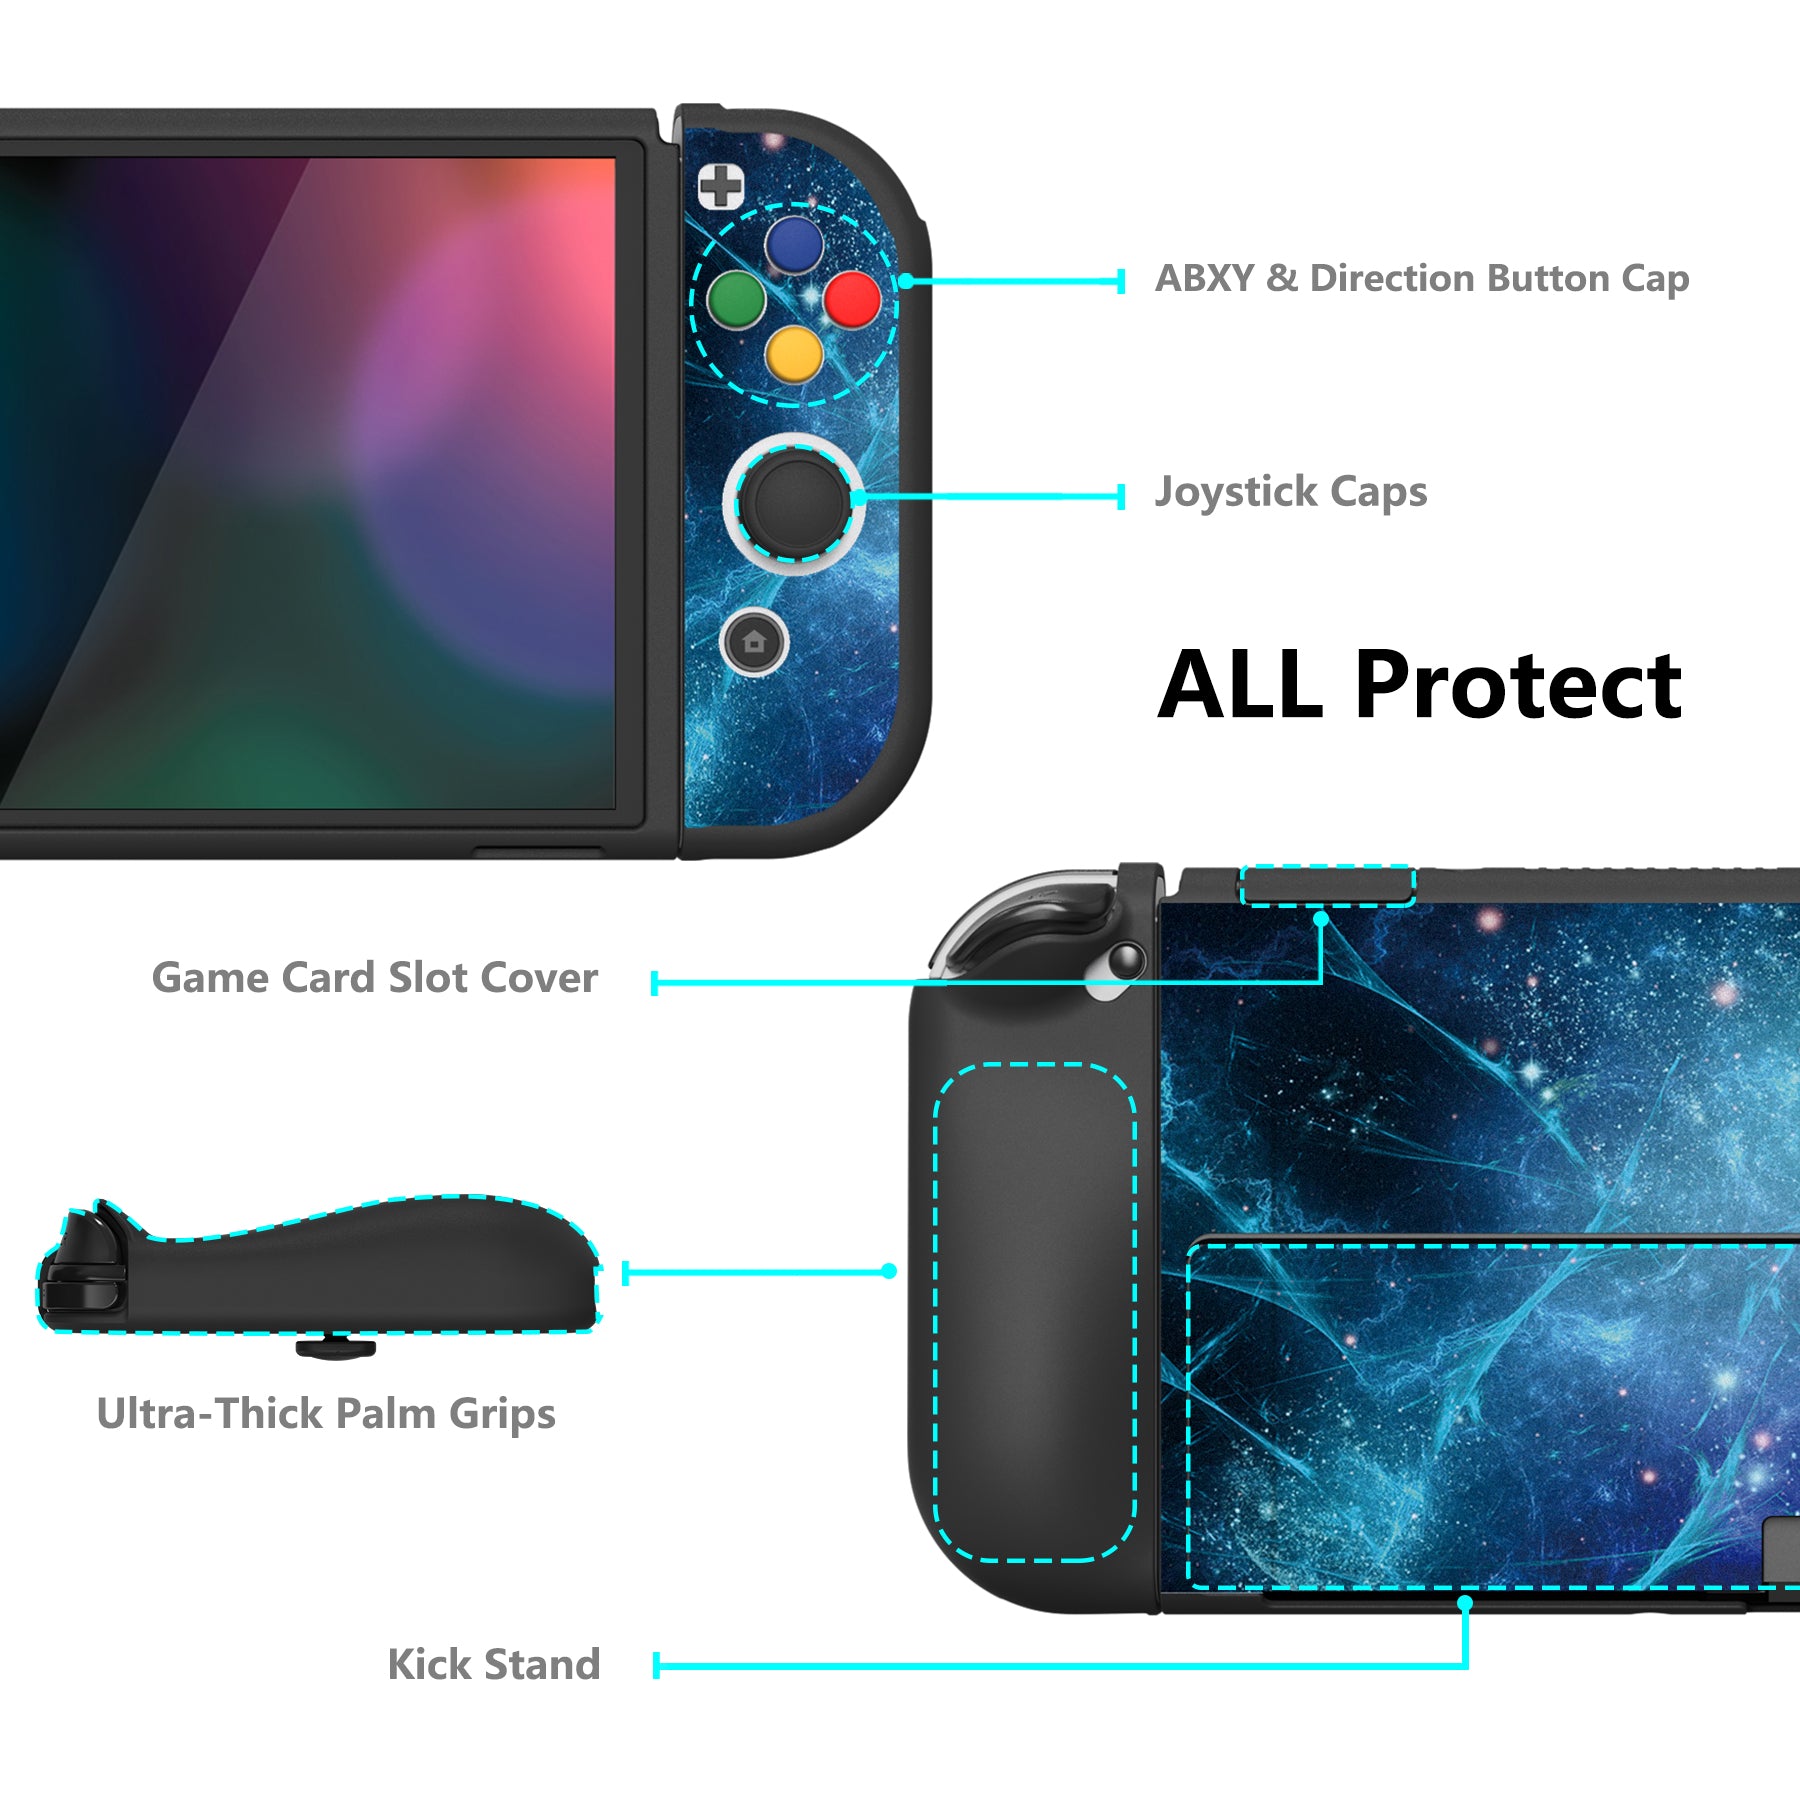 PlayVital ZealProtect Soft Protective Case for Switch OLED, Flexible Protector Joycon Grip Cover for Switch OLED with Thumb Grip Caps & ABXY Direction Button Caps - Blue Nebula - XSOYV6002 playvital